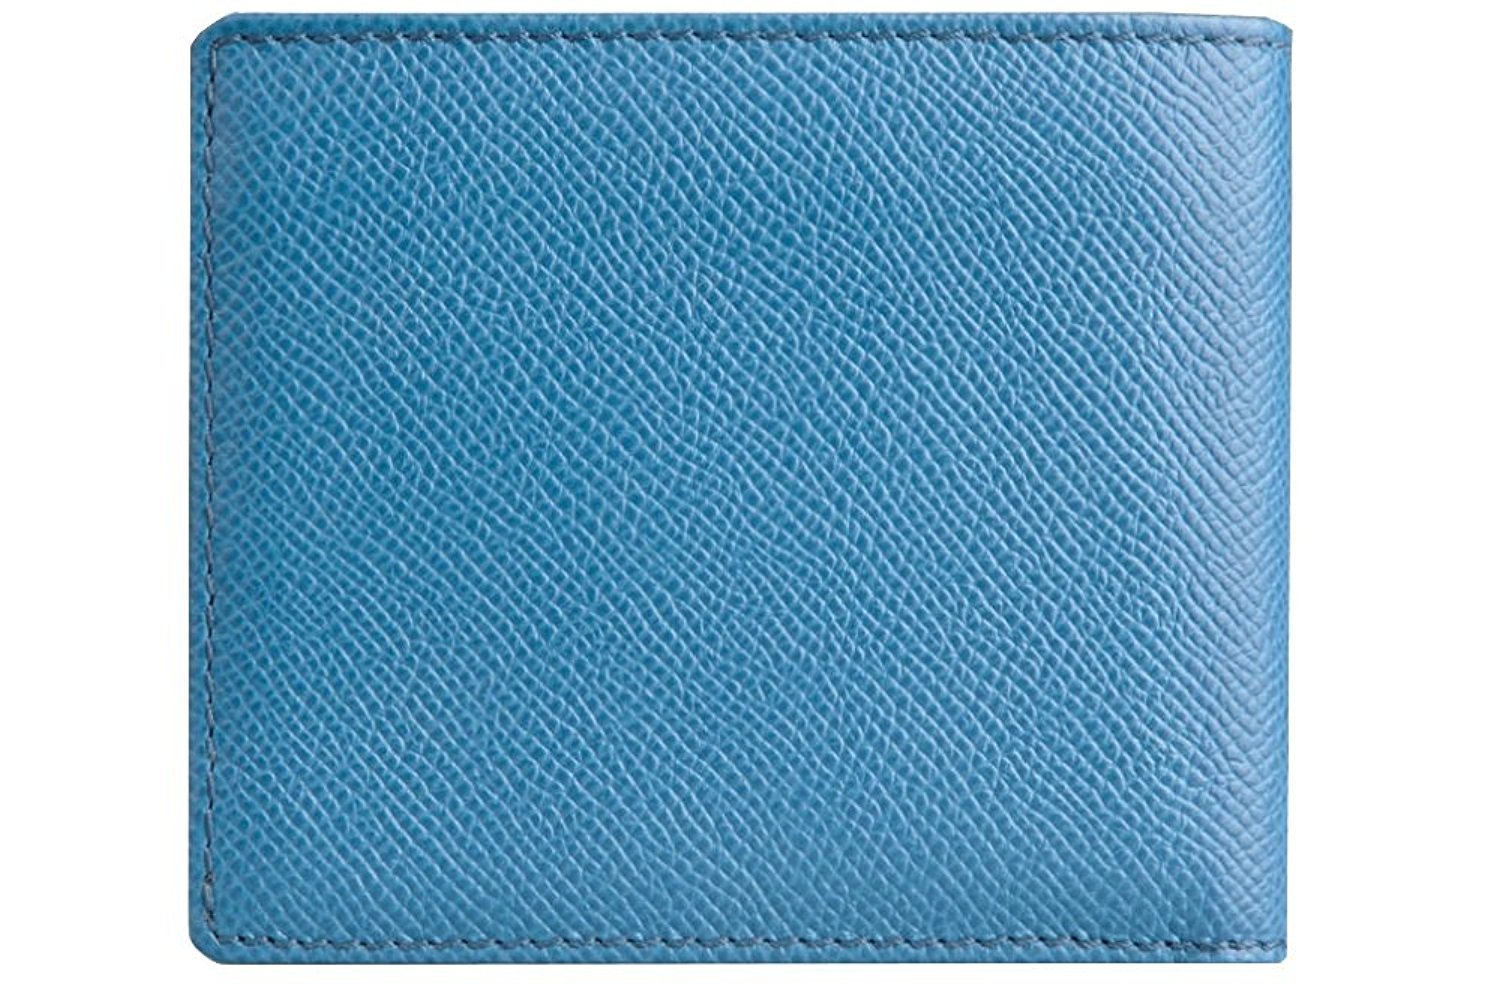 Burberry London Leather 8 Credit Card Billfold Wallet Airforce Blue Light  Blue 